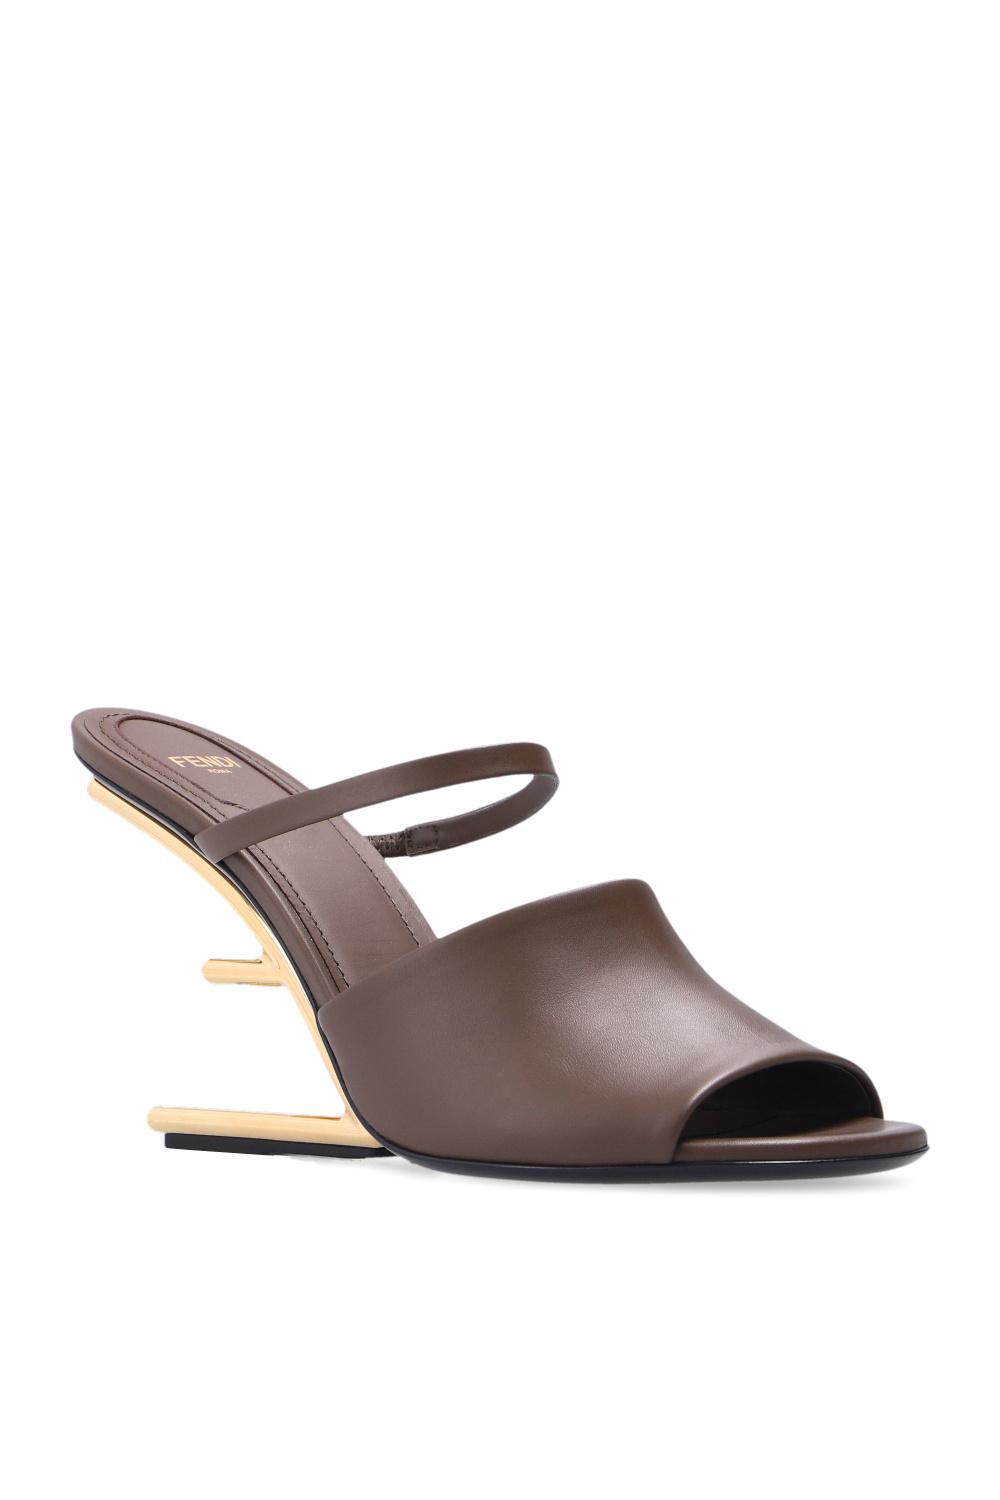 Fendi ' First' Heeled Mules in Brown | Lyst